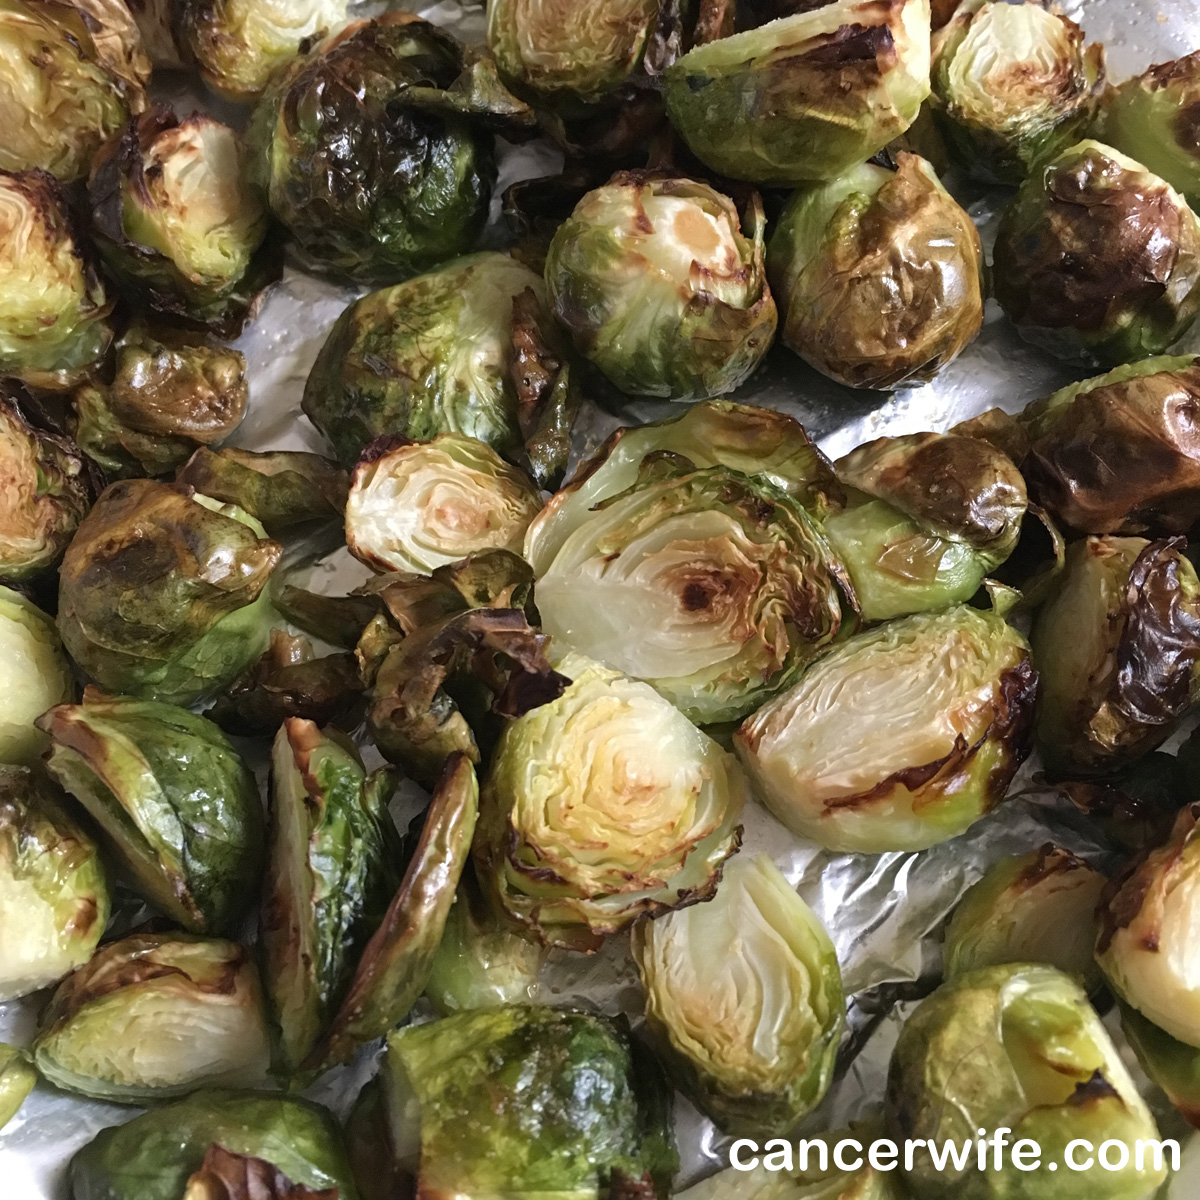 Nuwave Oven roasted brussel sprouts recipe